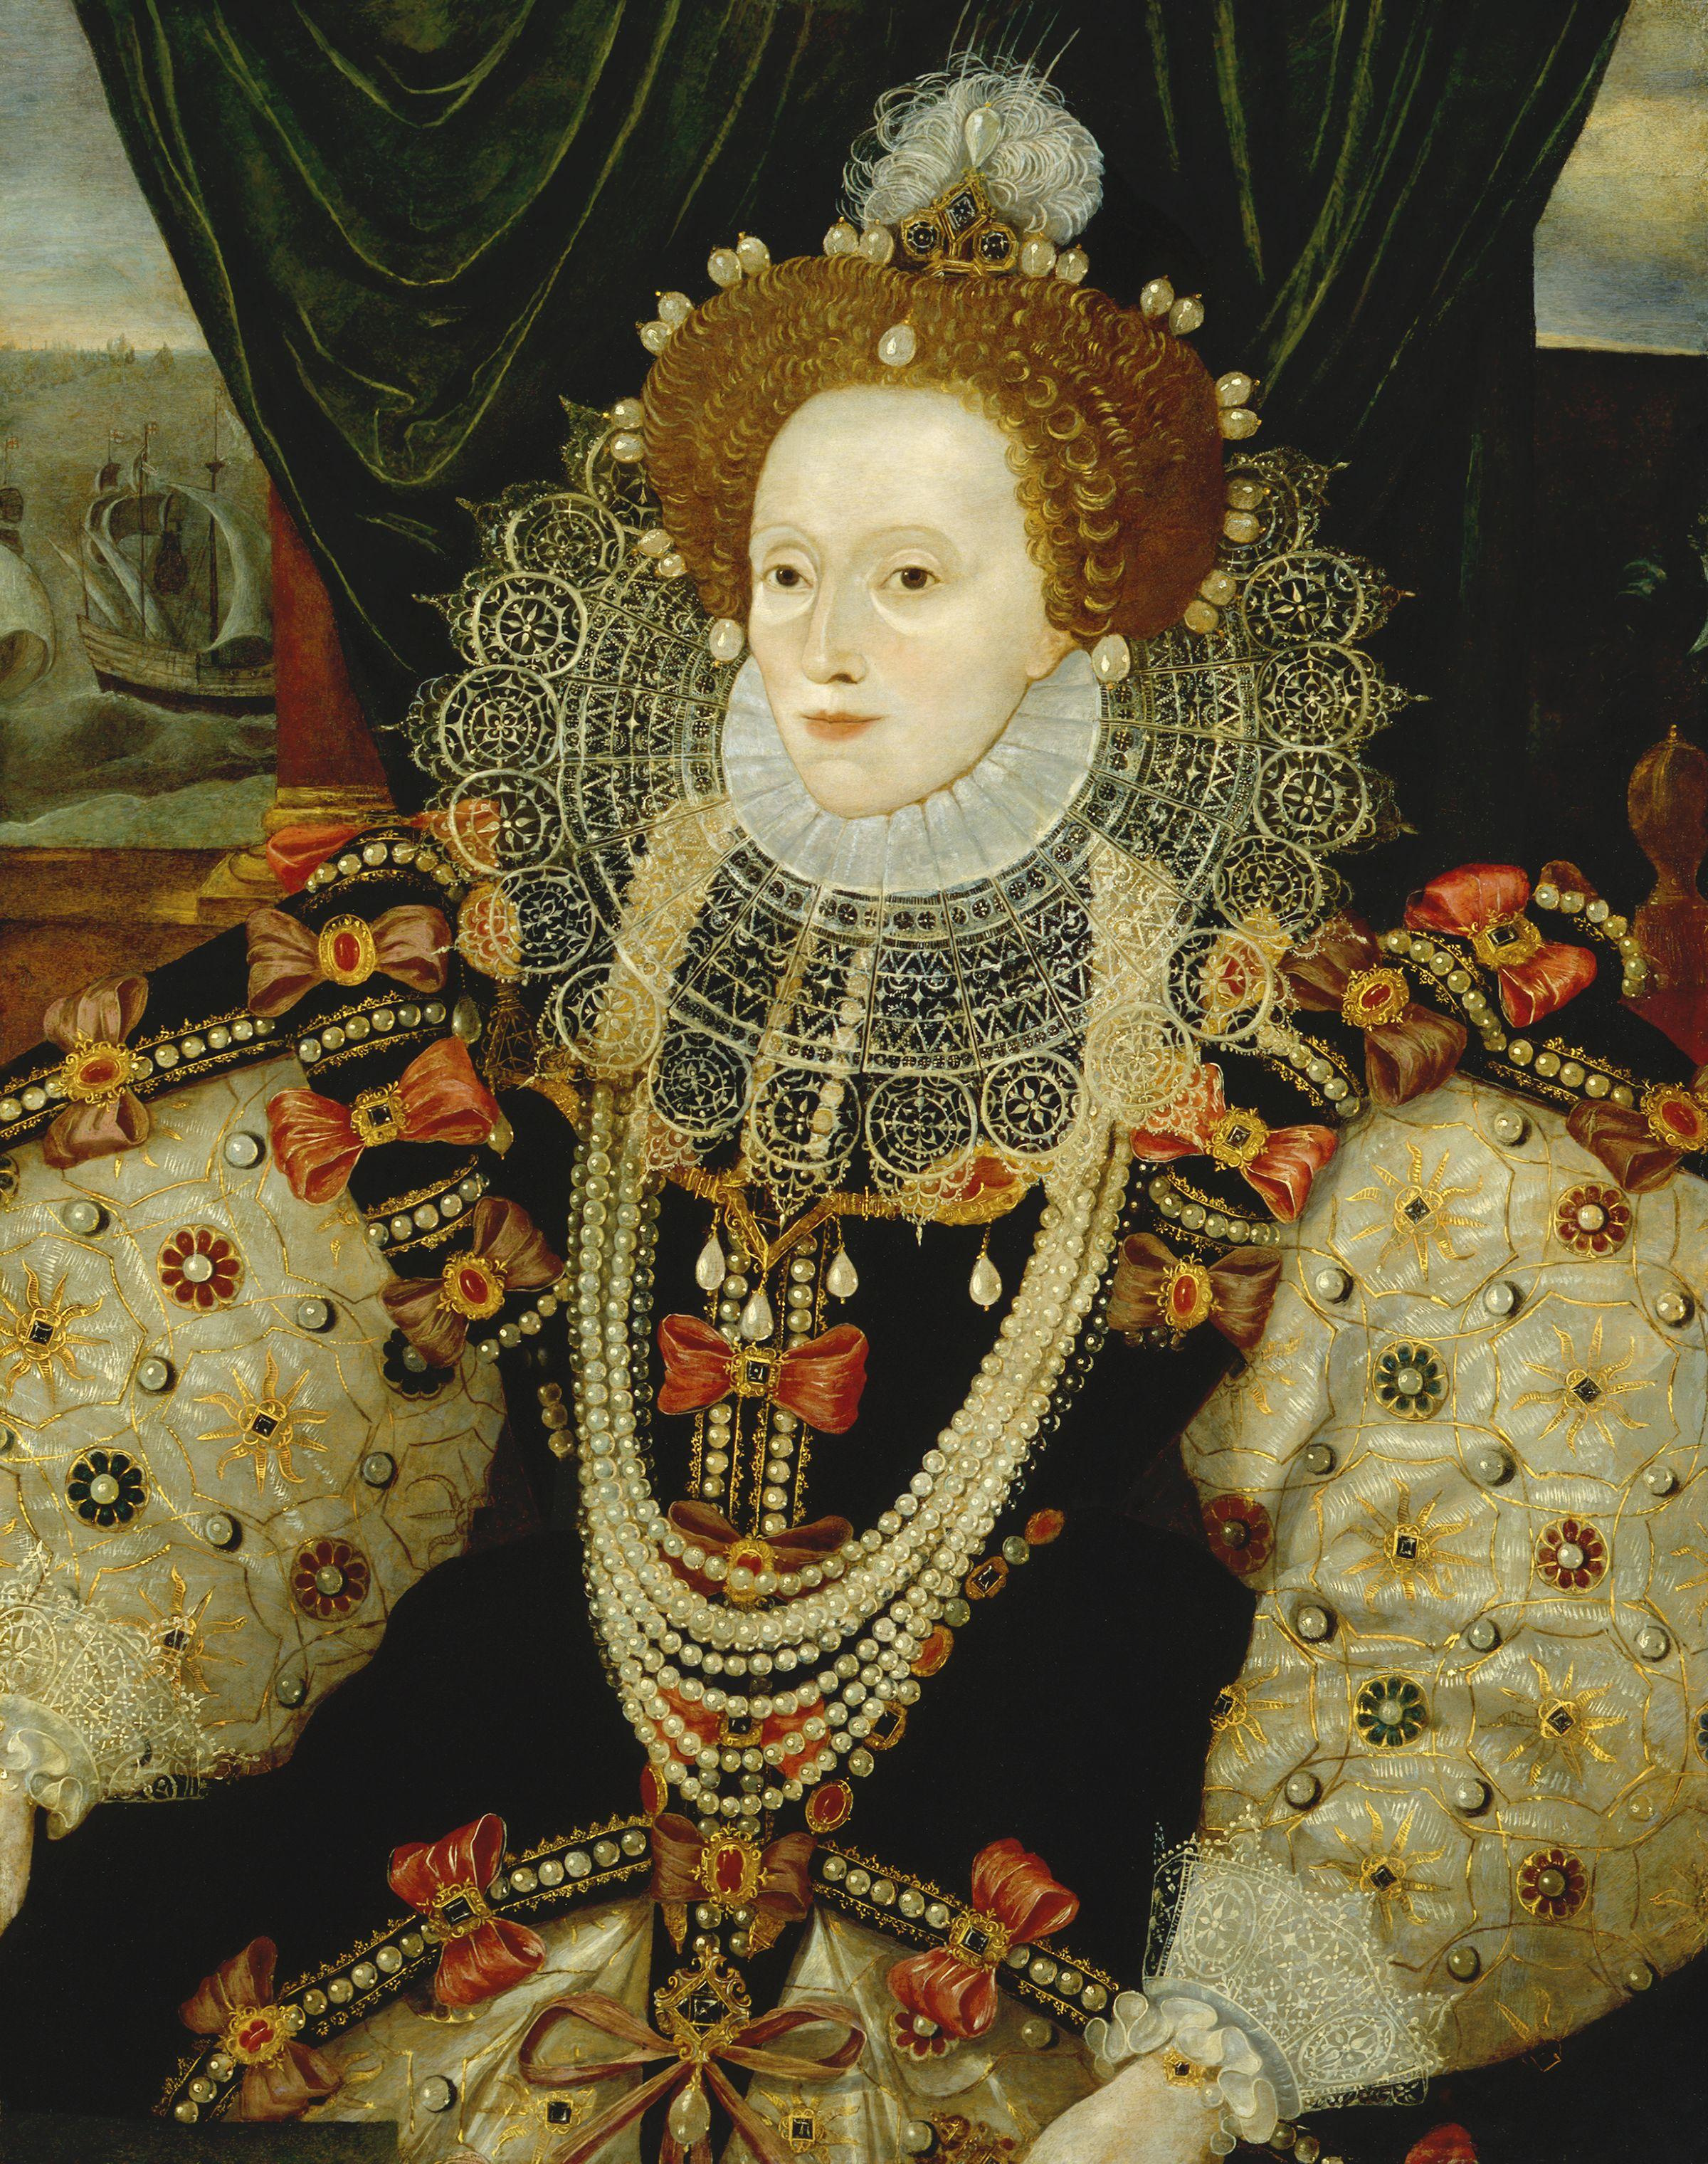 http://upload.wikimedia.org/wikipedia/commons/b/bf/Queen_Elizabeth_I_by_George_Gower.jpg